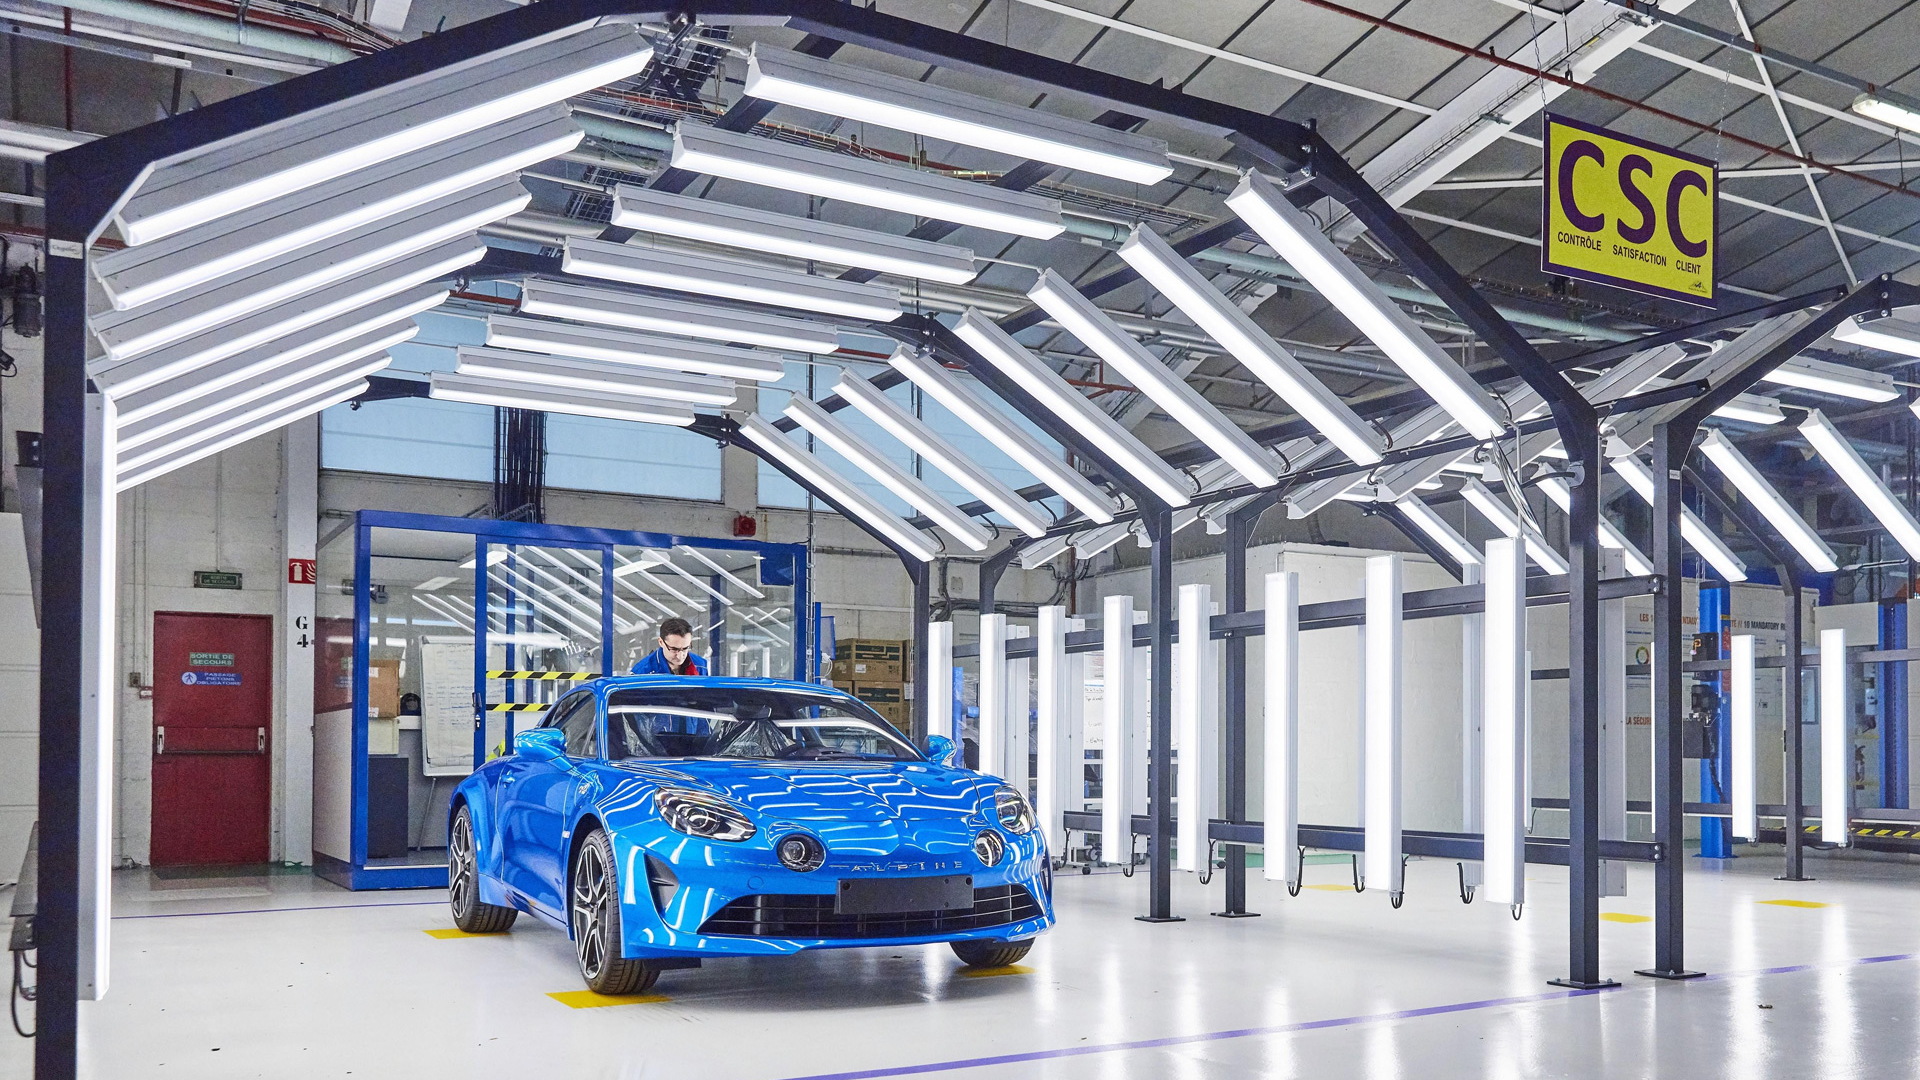 Alpine A110 production in Dieppe, France